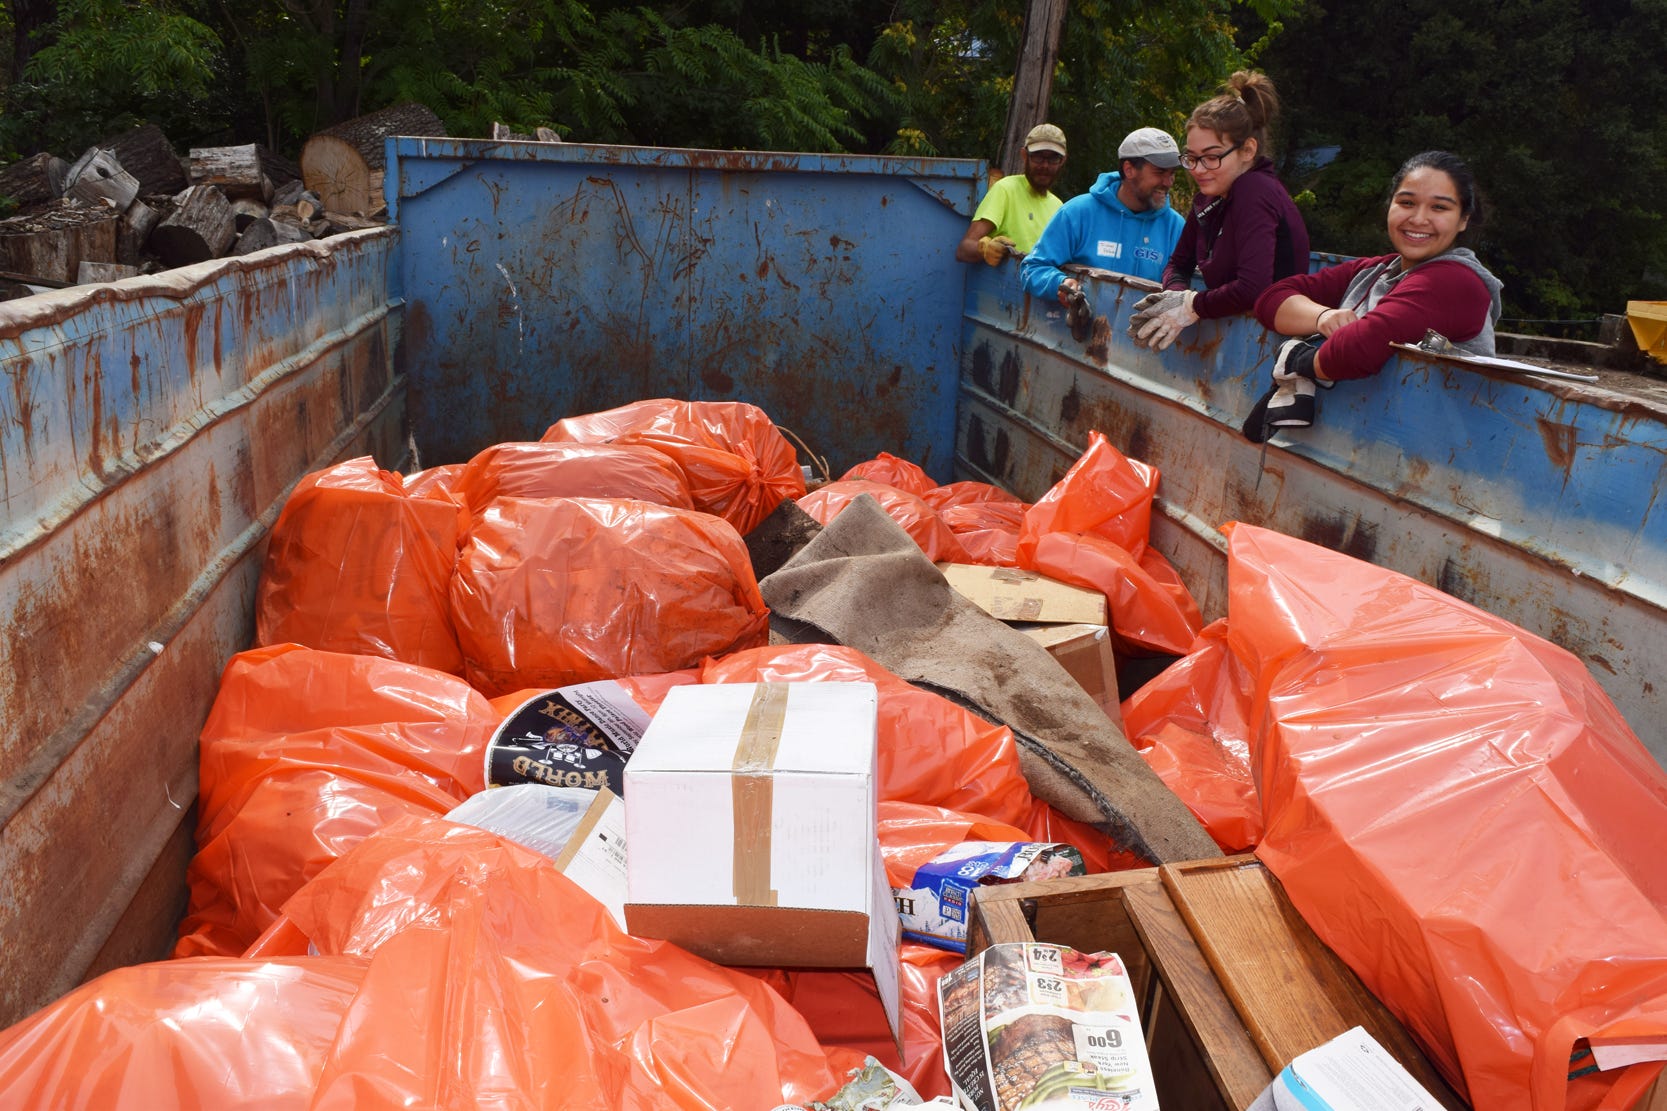 Bags of trash were taken out of the Sacramento River in 2017 as part of the River Exchange's cleanup effort.